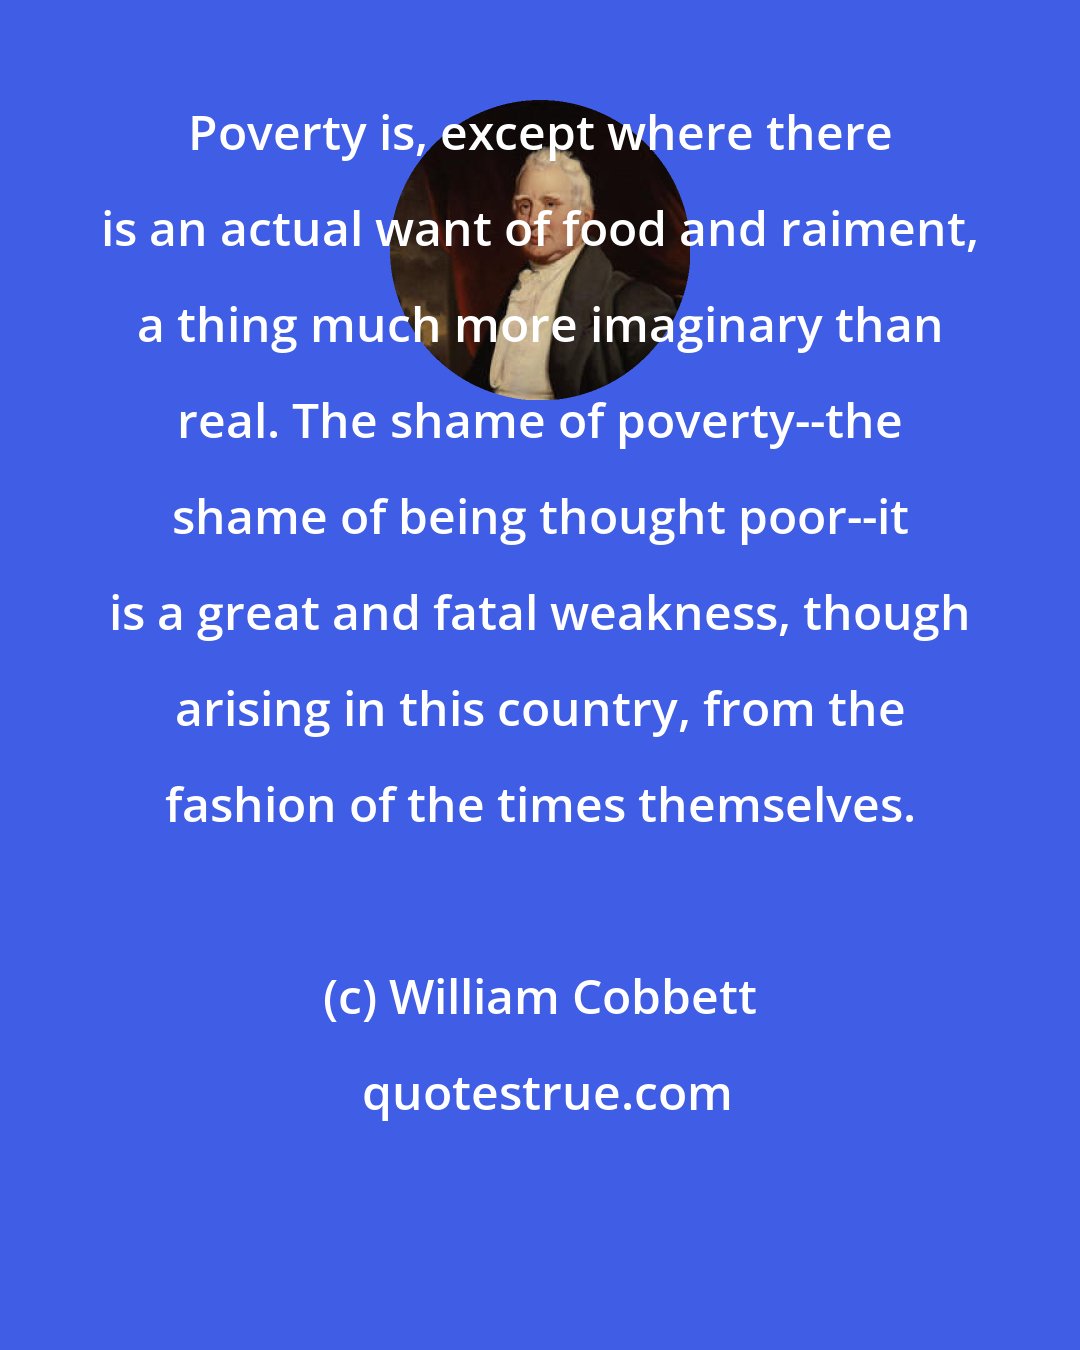 William Cobbett: Poverty is, except where there is an actual want of food and raiment, a thing much more imaginary than real. The shame of poverty--the shame of being thought poor--it is a great and fatal weakness, though arising in this country, from the fashion of the times themselves.